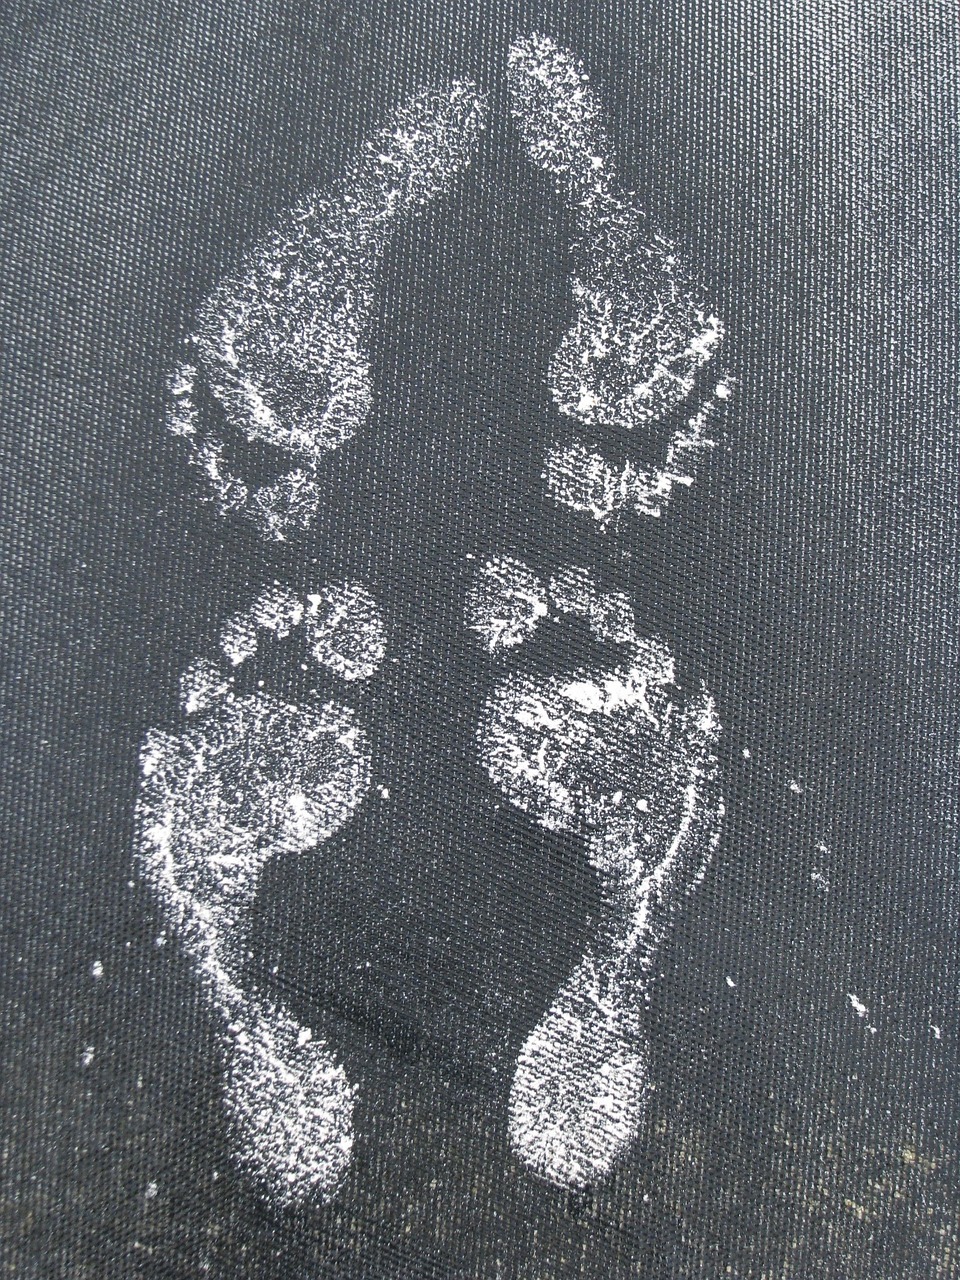 the soles of the feet footprint a couple of free photo